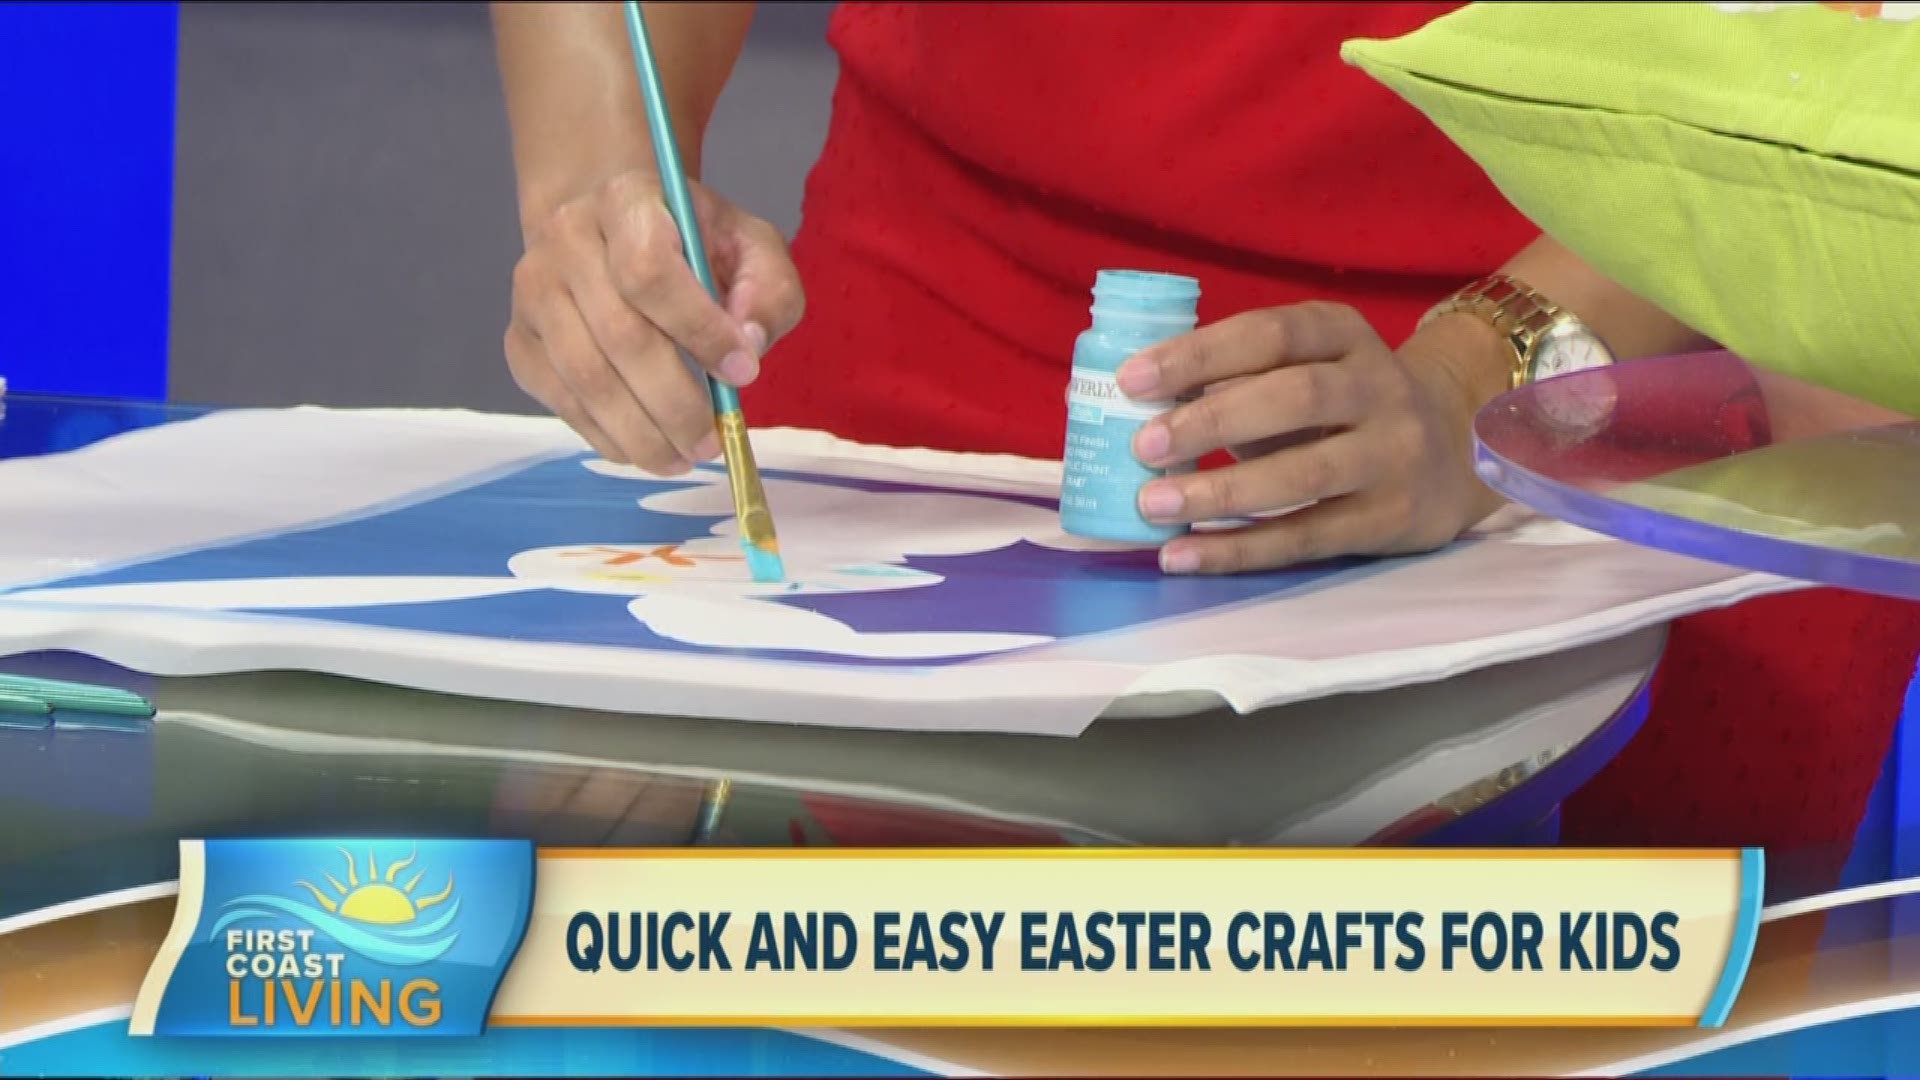 Use these fun DIY craft ideas from a master crafter to have fun with the kids this Easter.